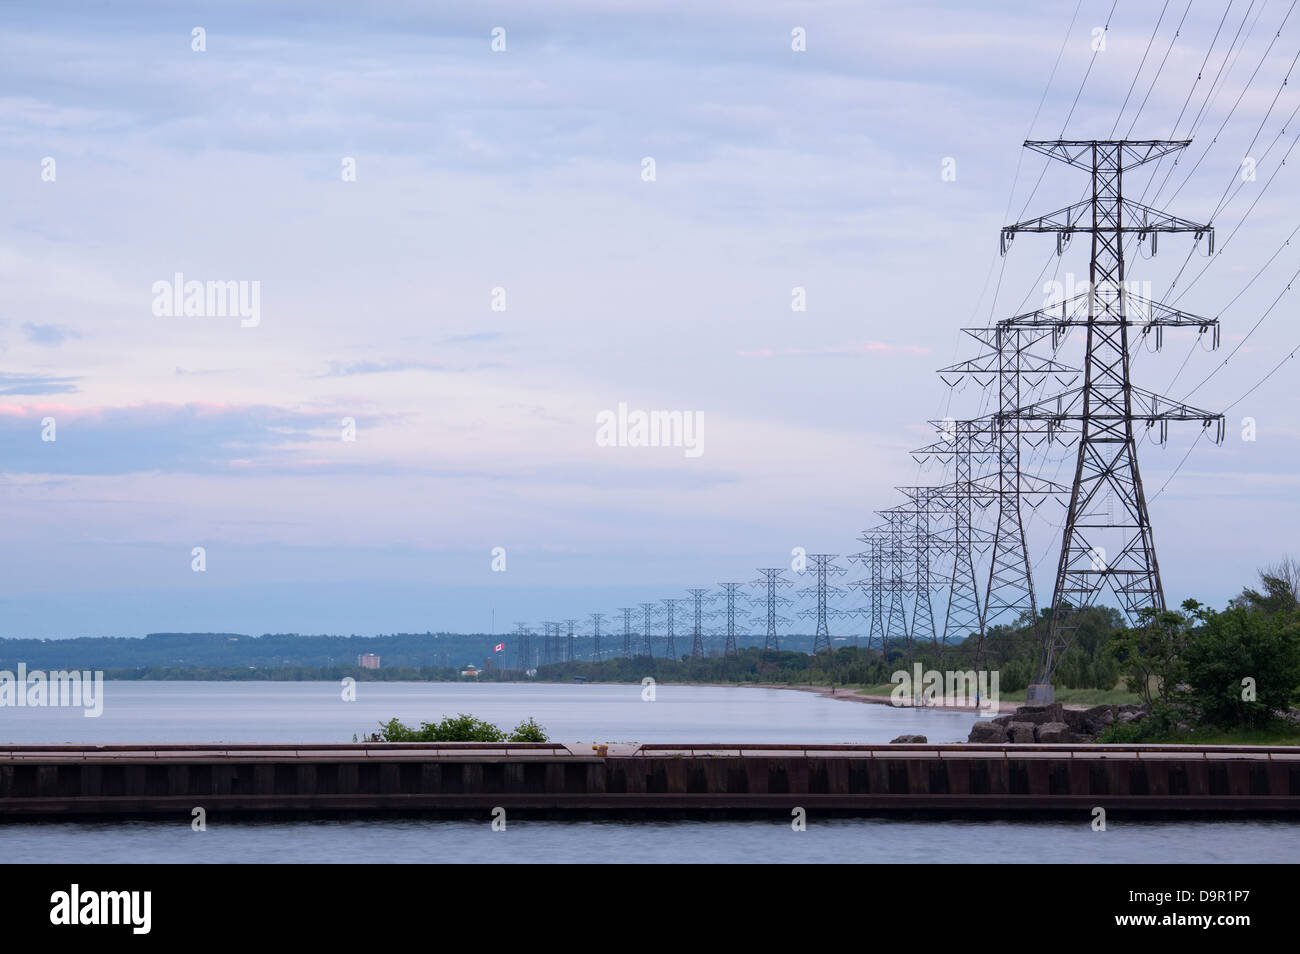 Pier and hydro lines along the waterfront, Hamilton, Ontario, Canada. Stock Photo